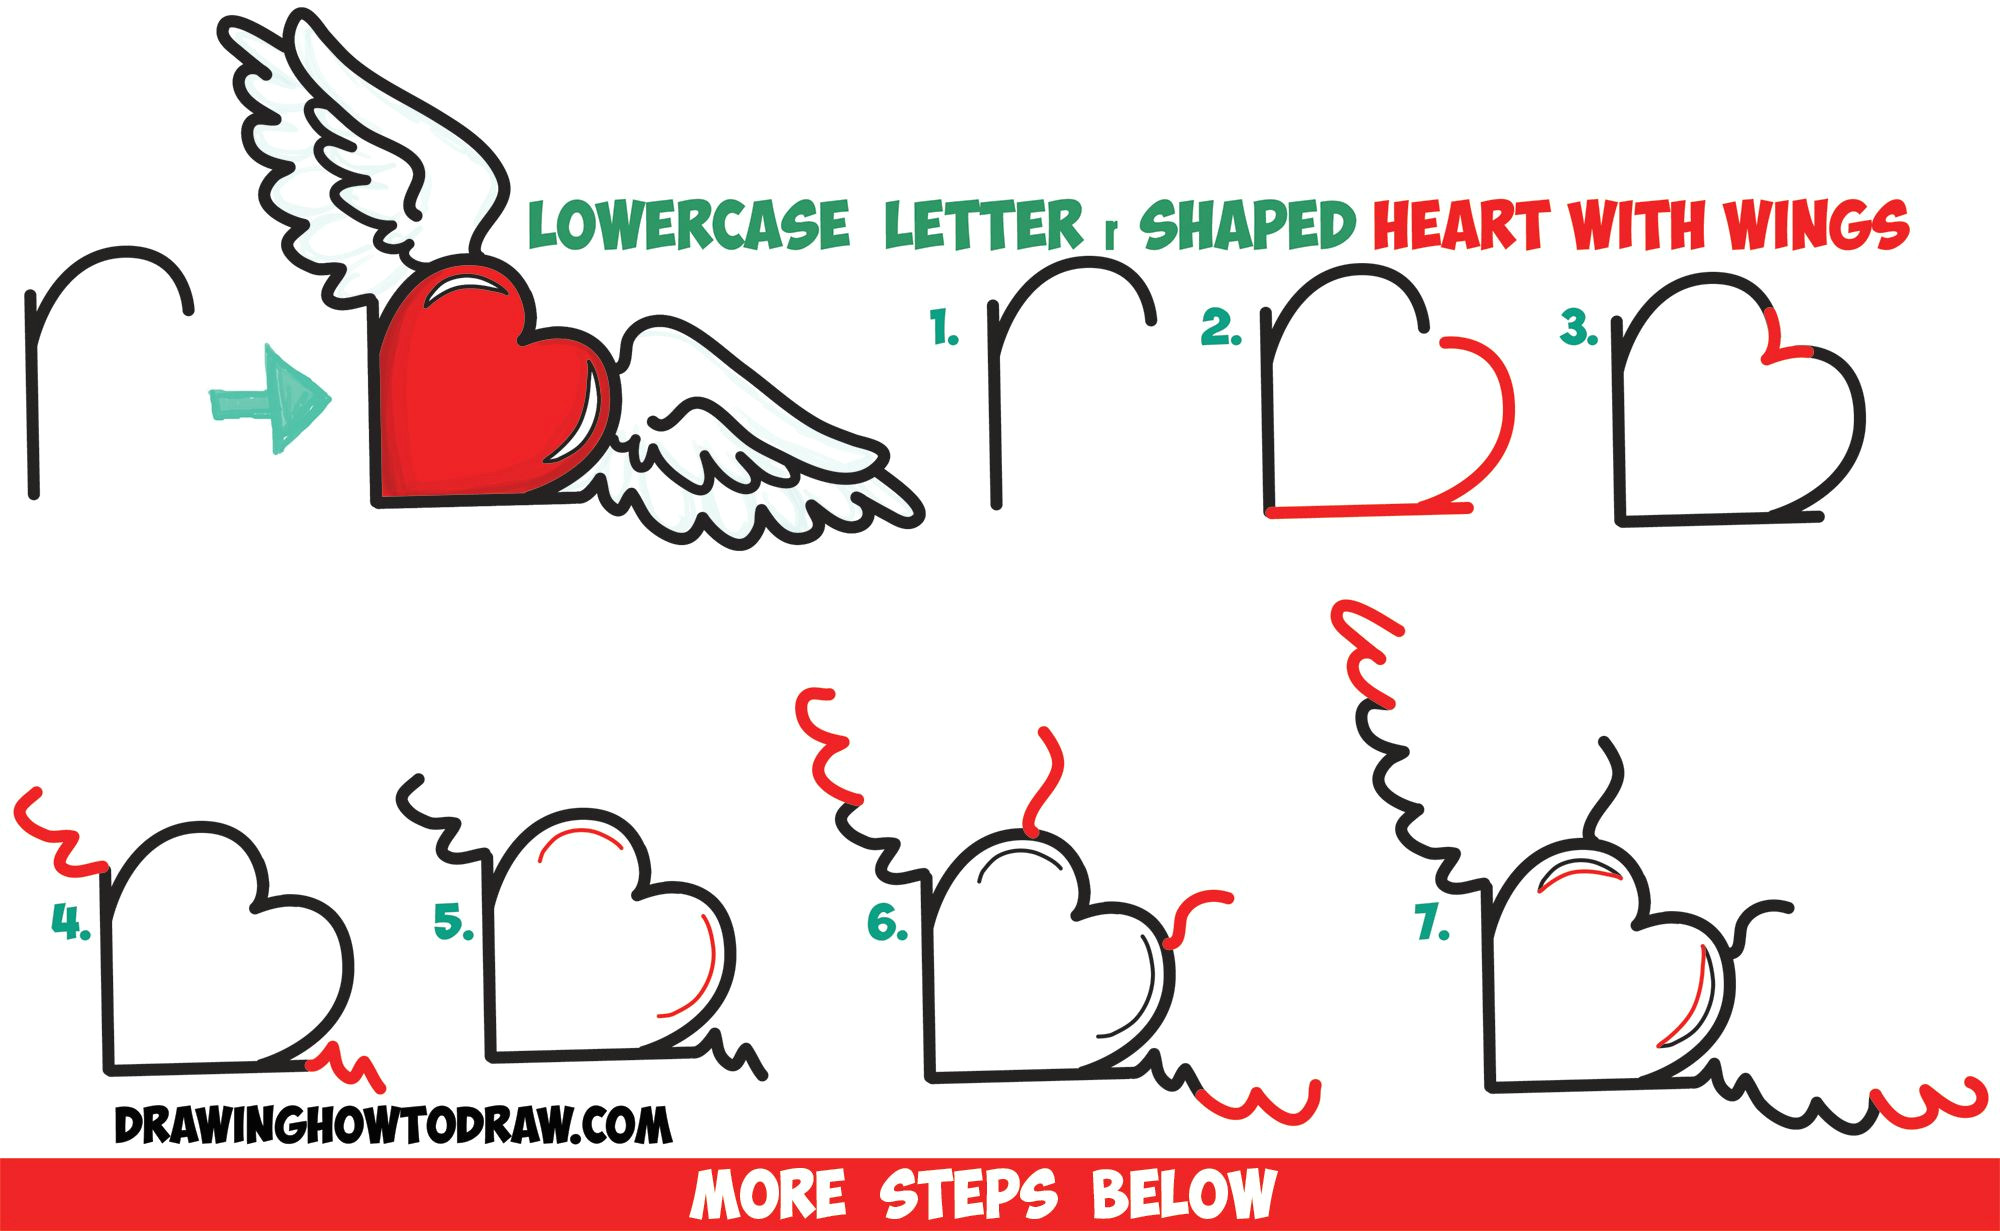 Drawing Of Heart Pictures How to Draw Heart with Wings From Lowercase Letter R Shapes Easy